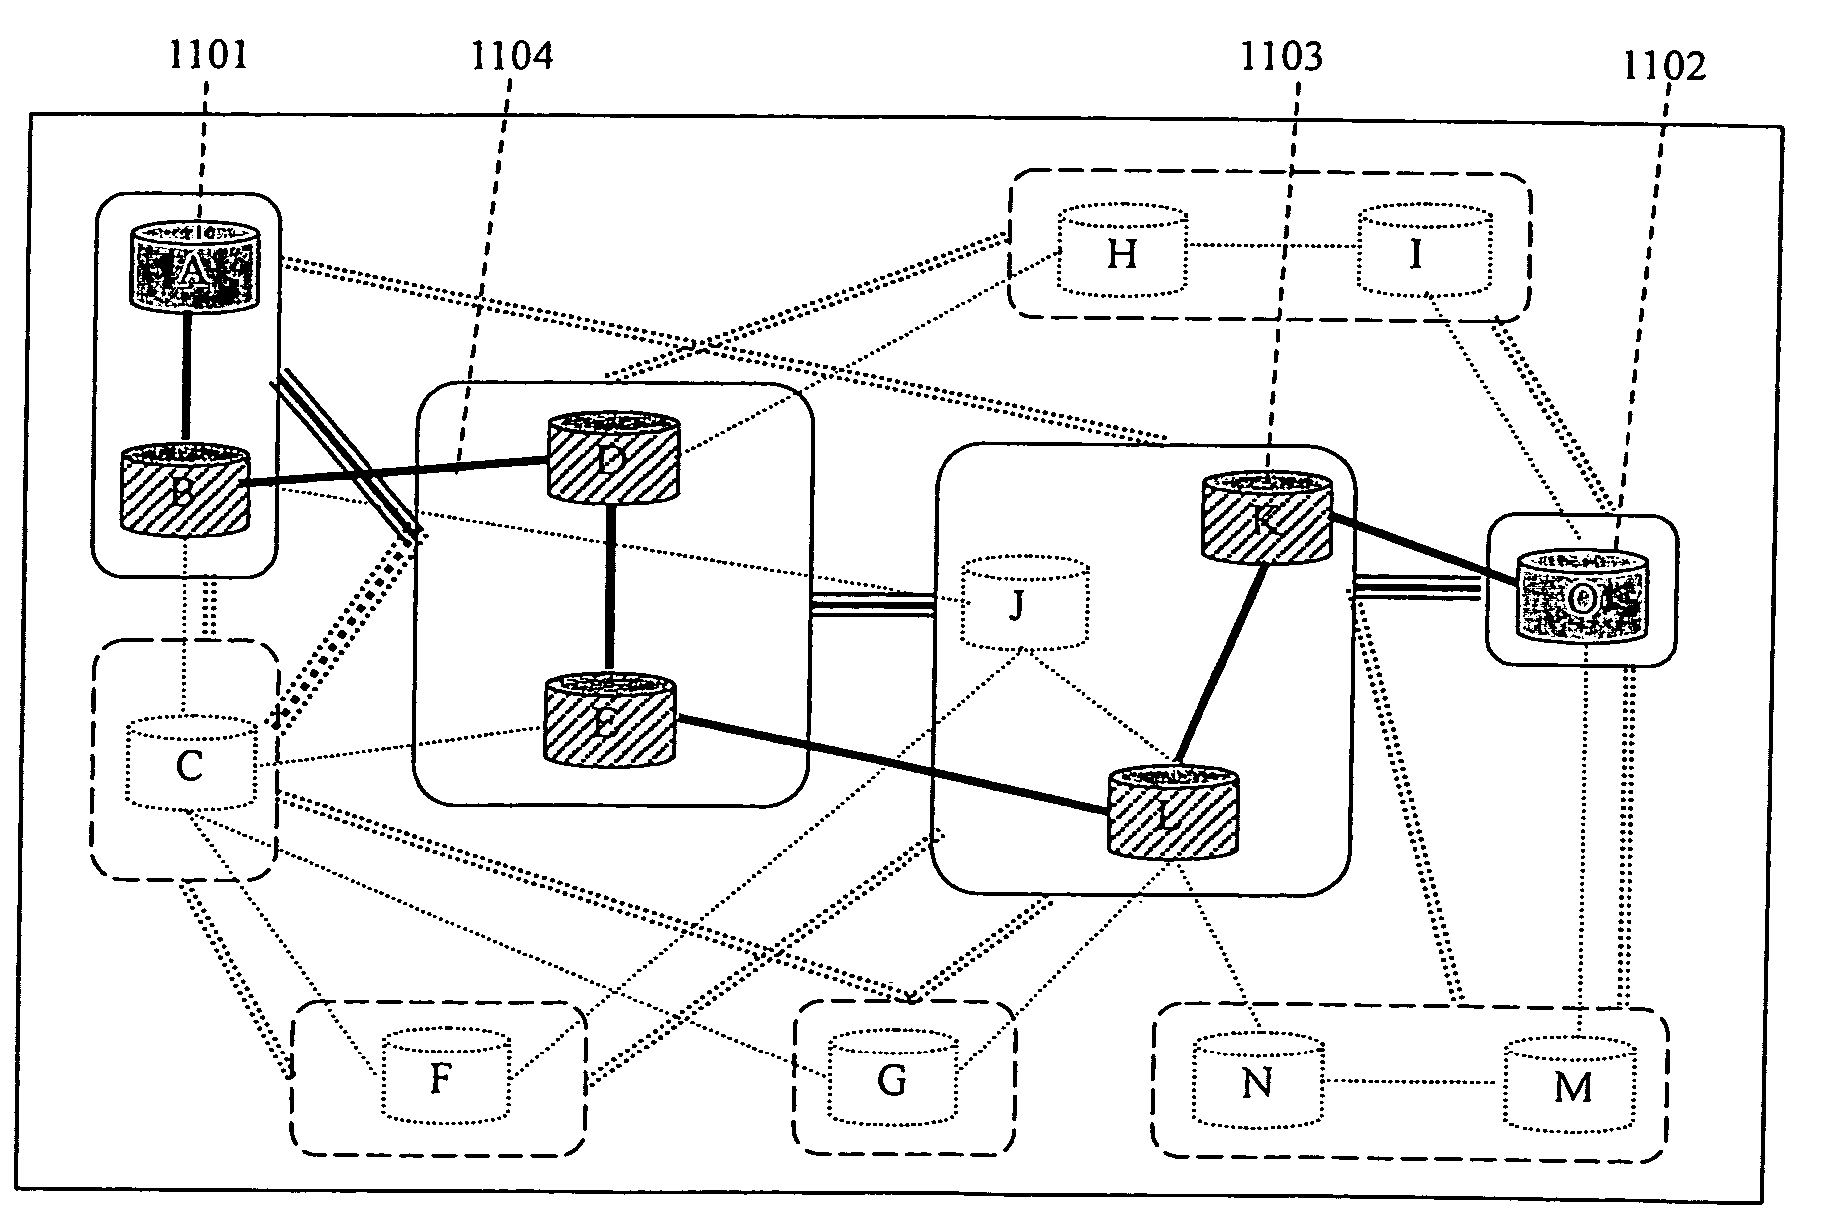 Method of determining database search path